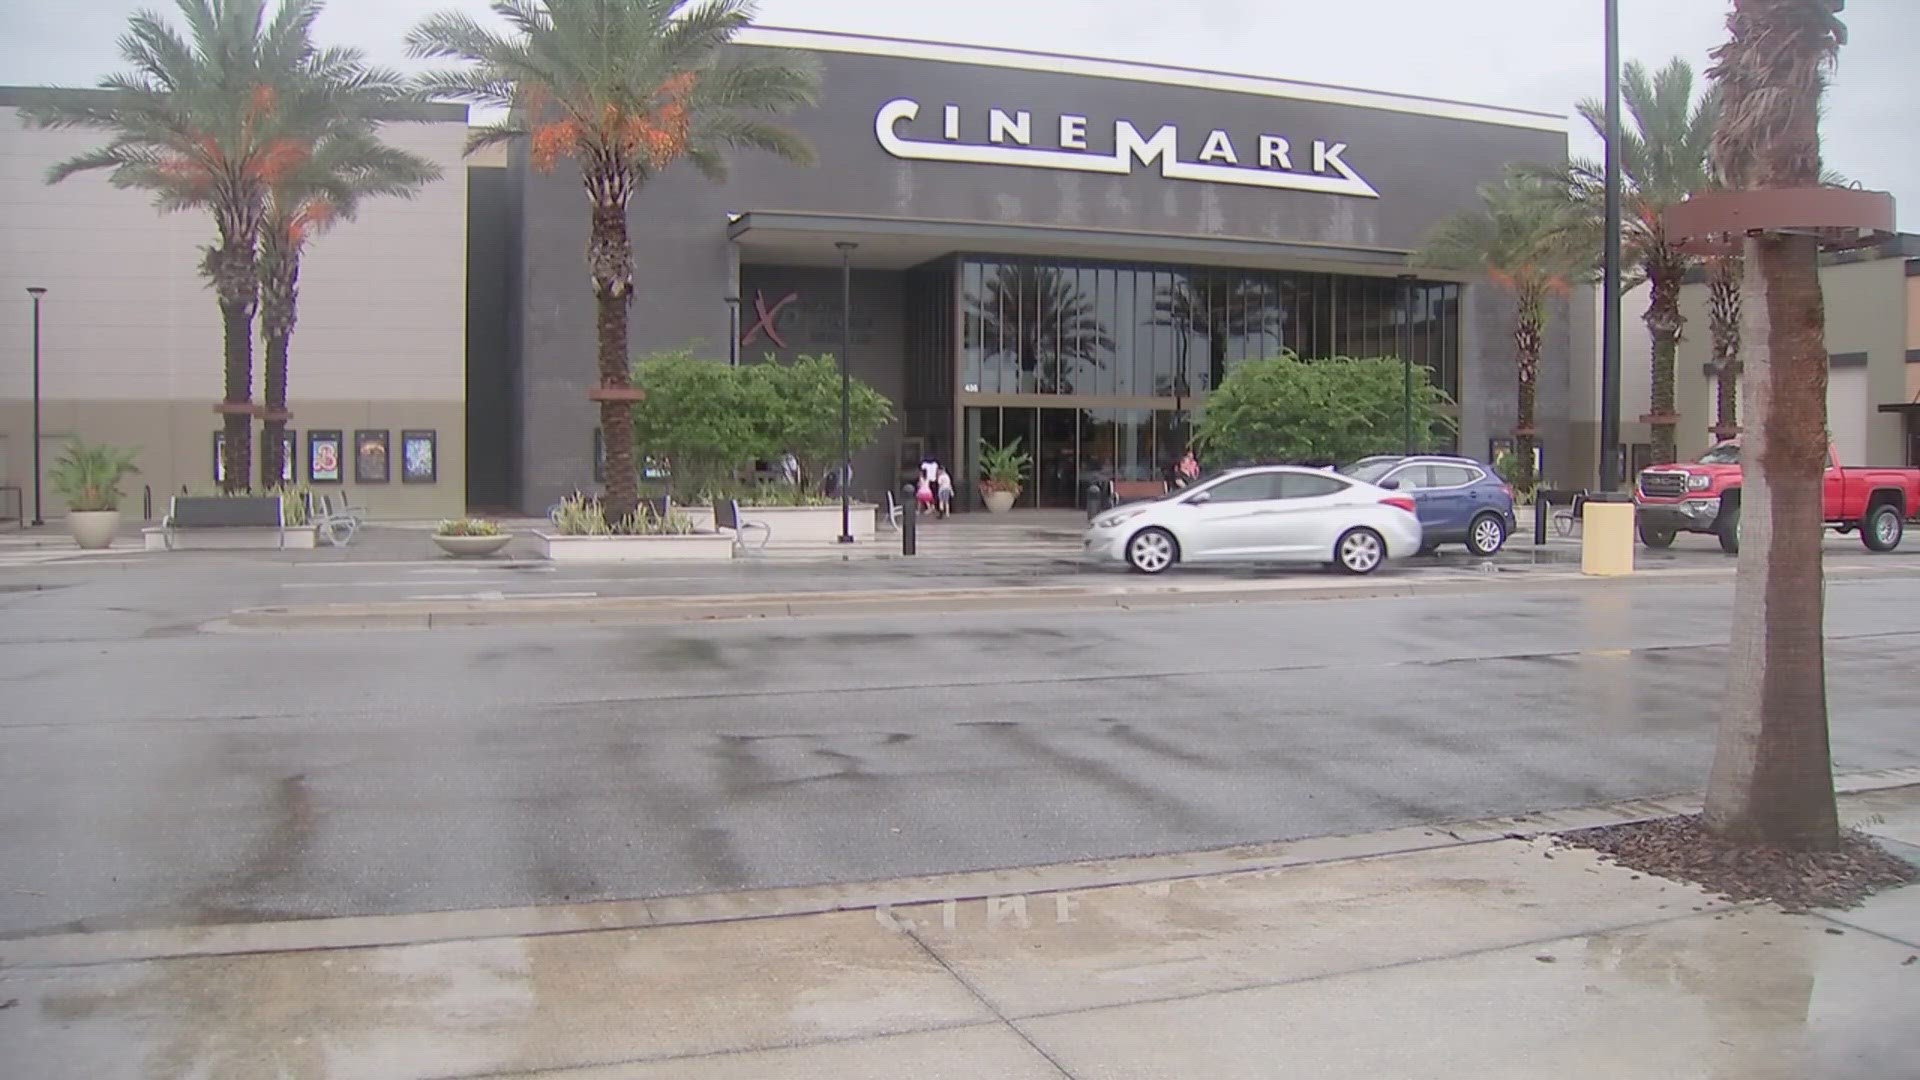 The lawsuit claims that Cinemark is selling drinks in containers that are labeled as 24 ounces but that the containers only hold 22 ounces.